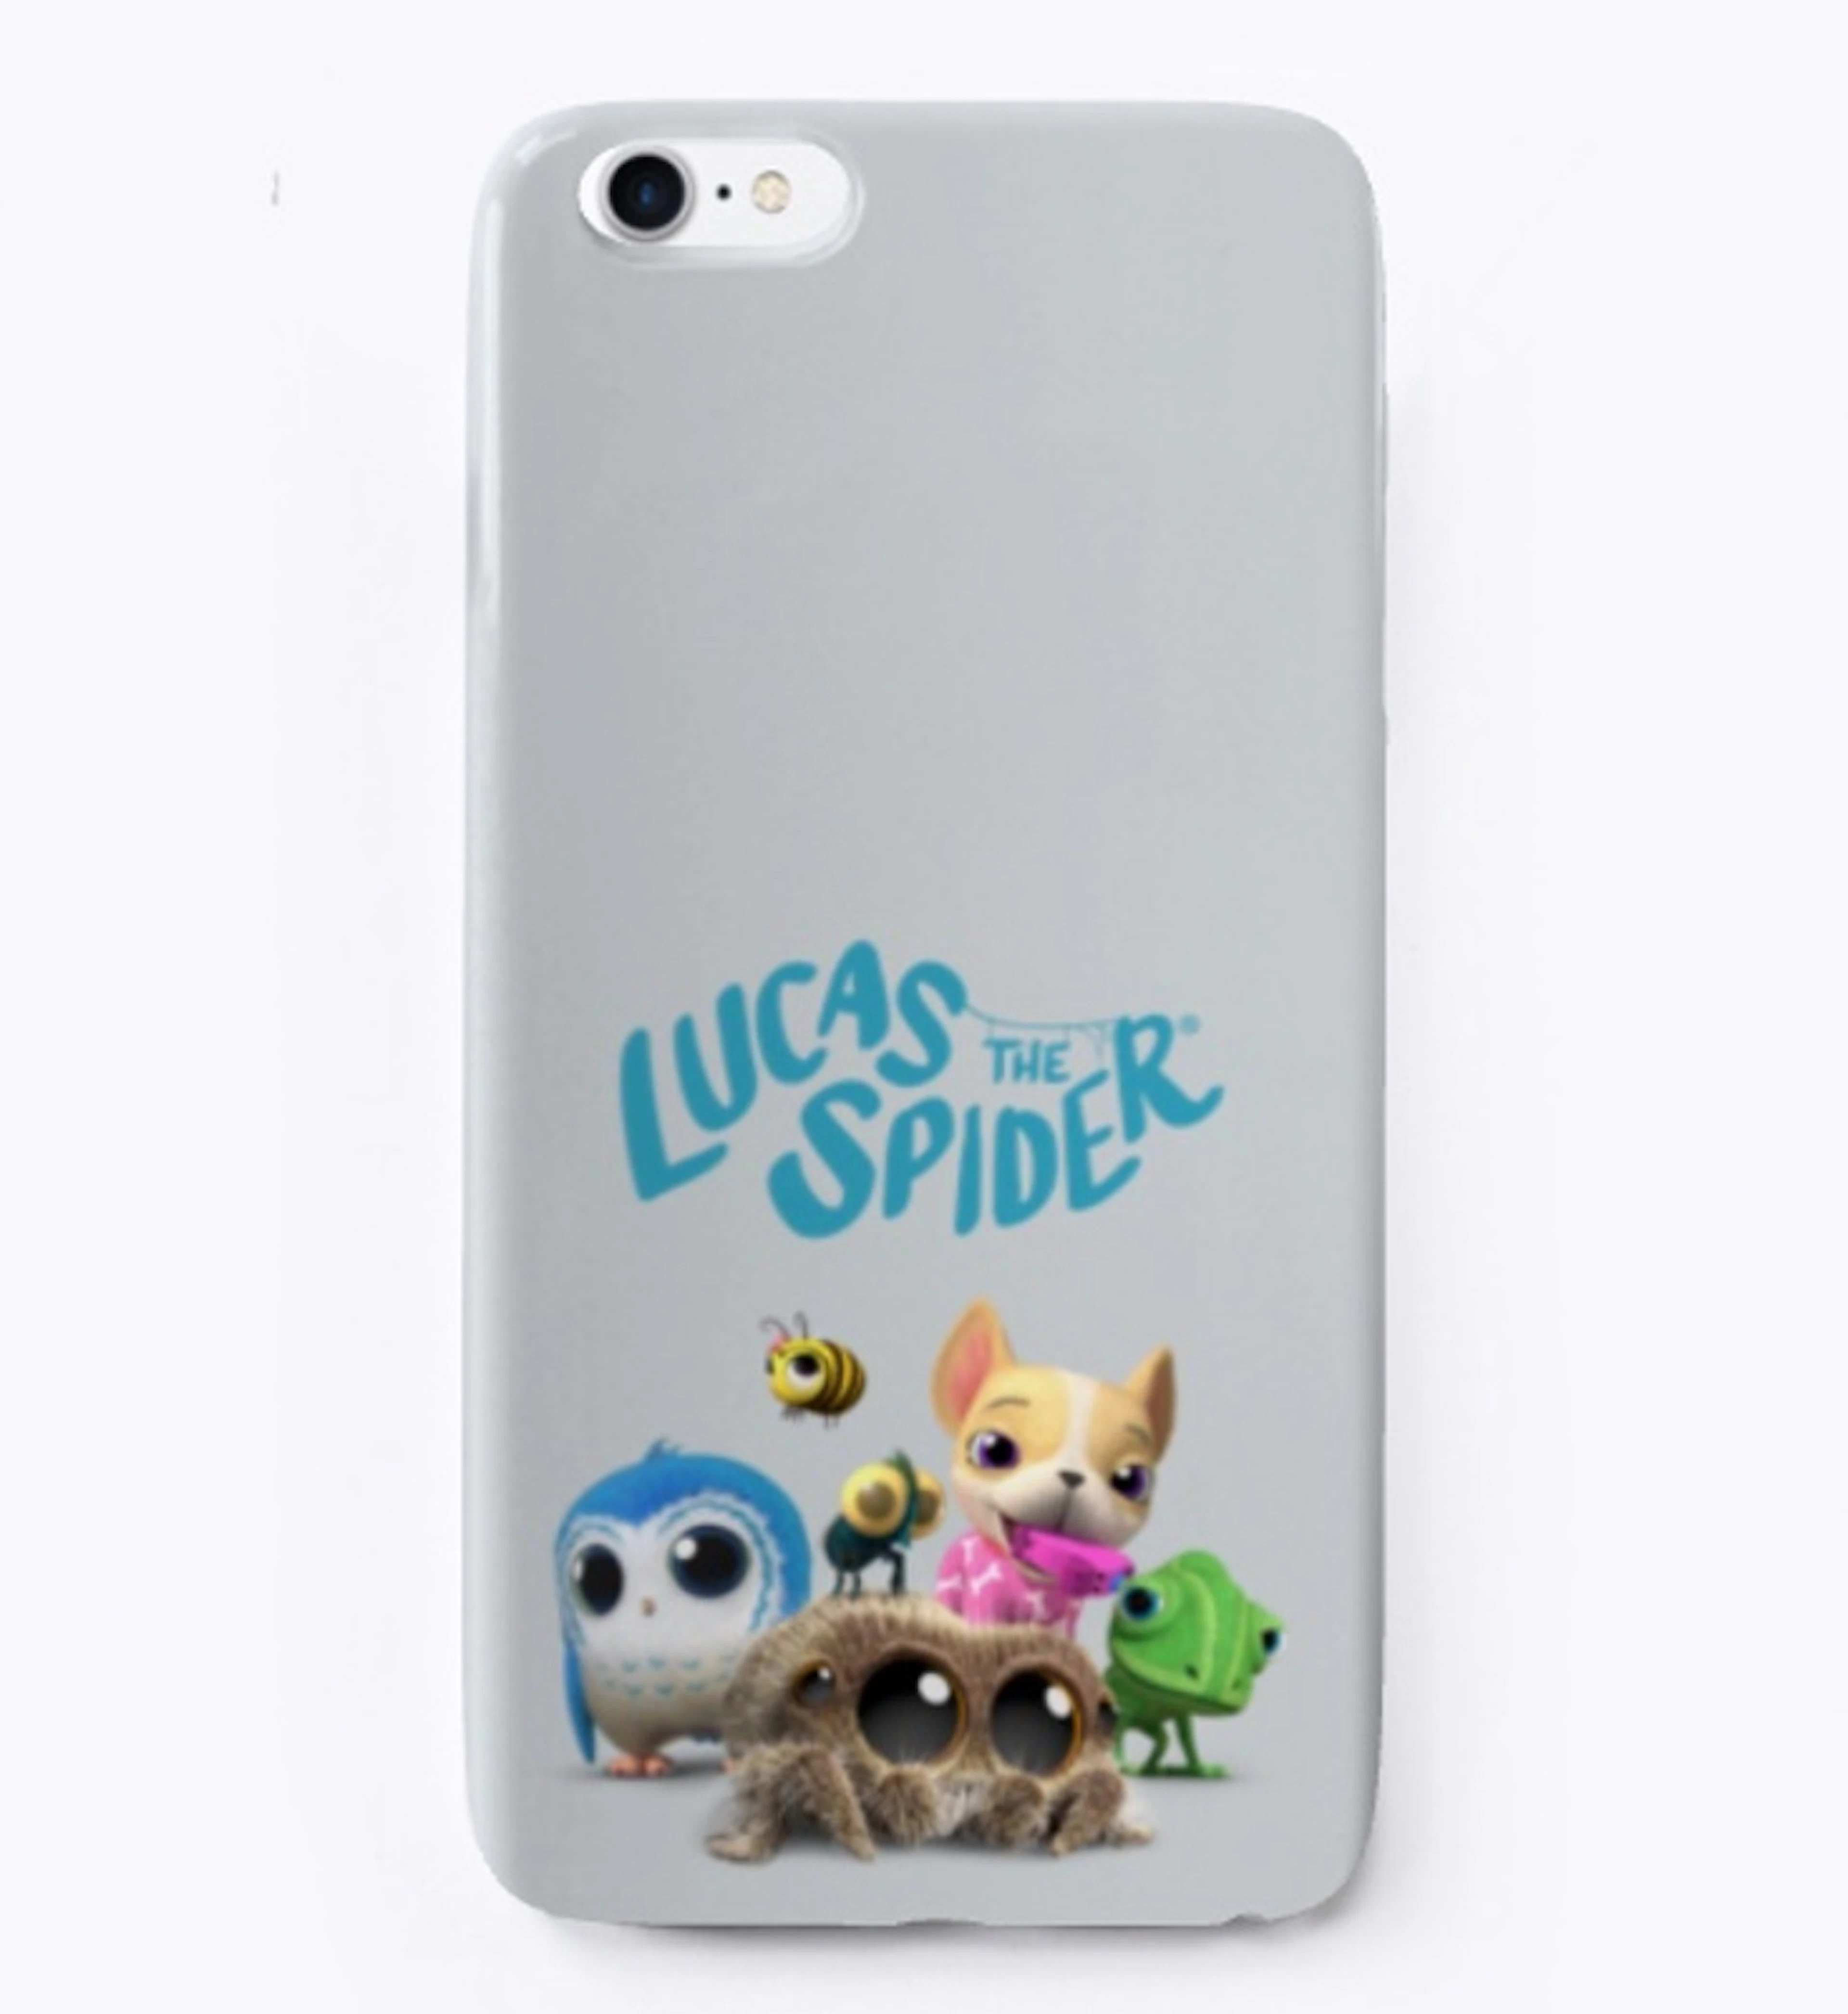  Lucas the Spider® with Friends (Blue) 